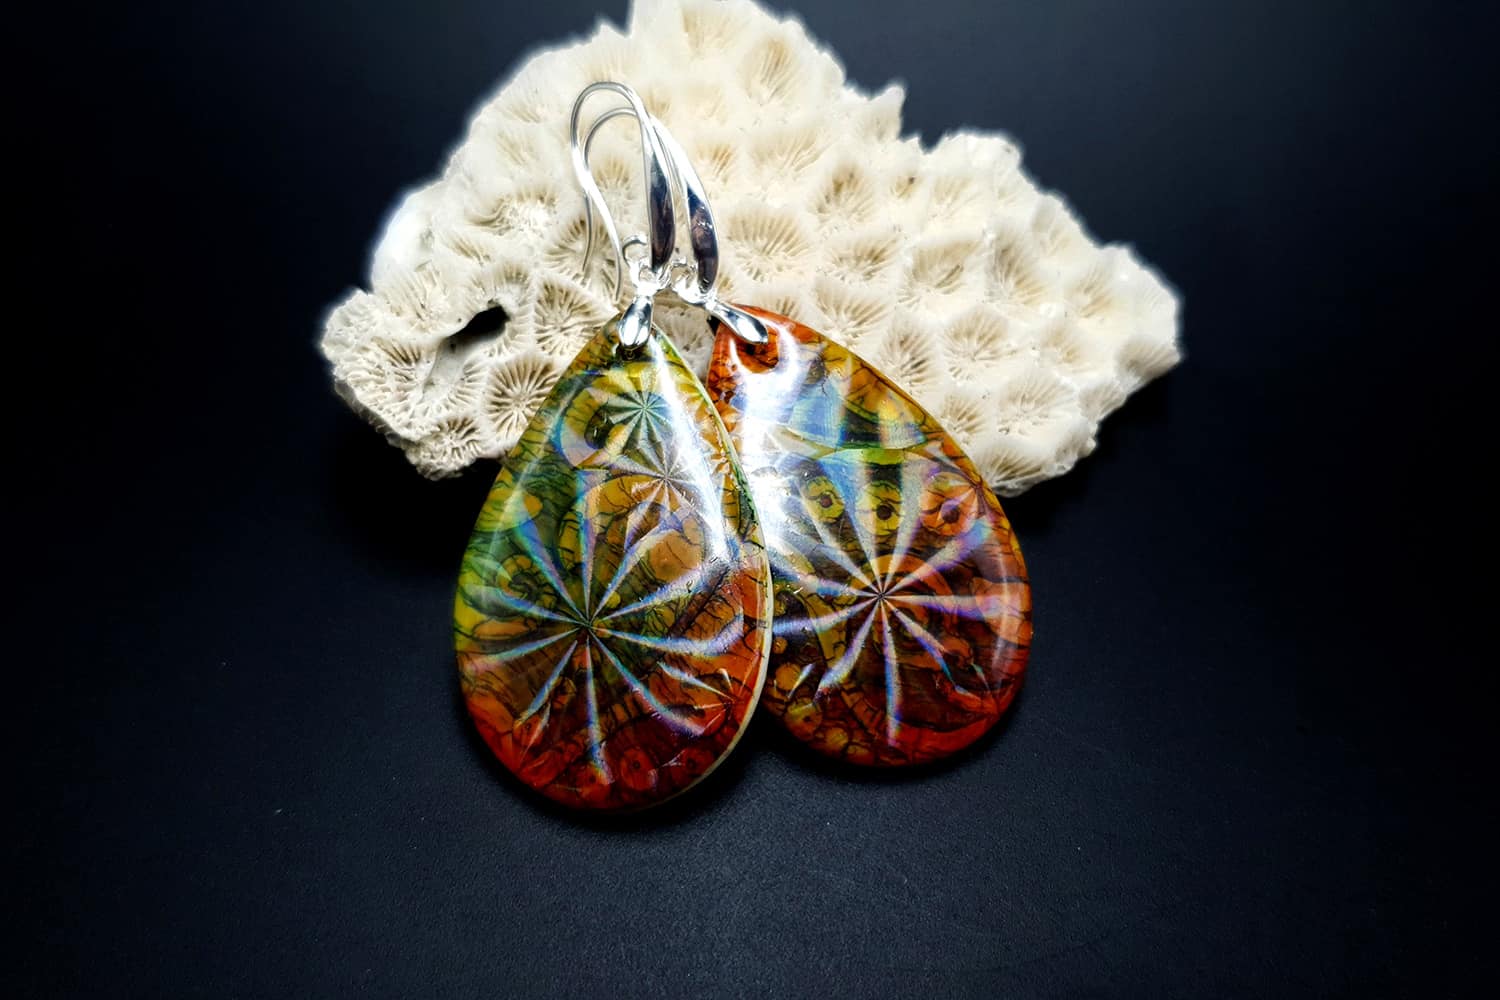 Jewelry from "Faux Glazed Cracked Ceramic" course for your inspiration #2